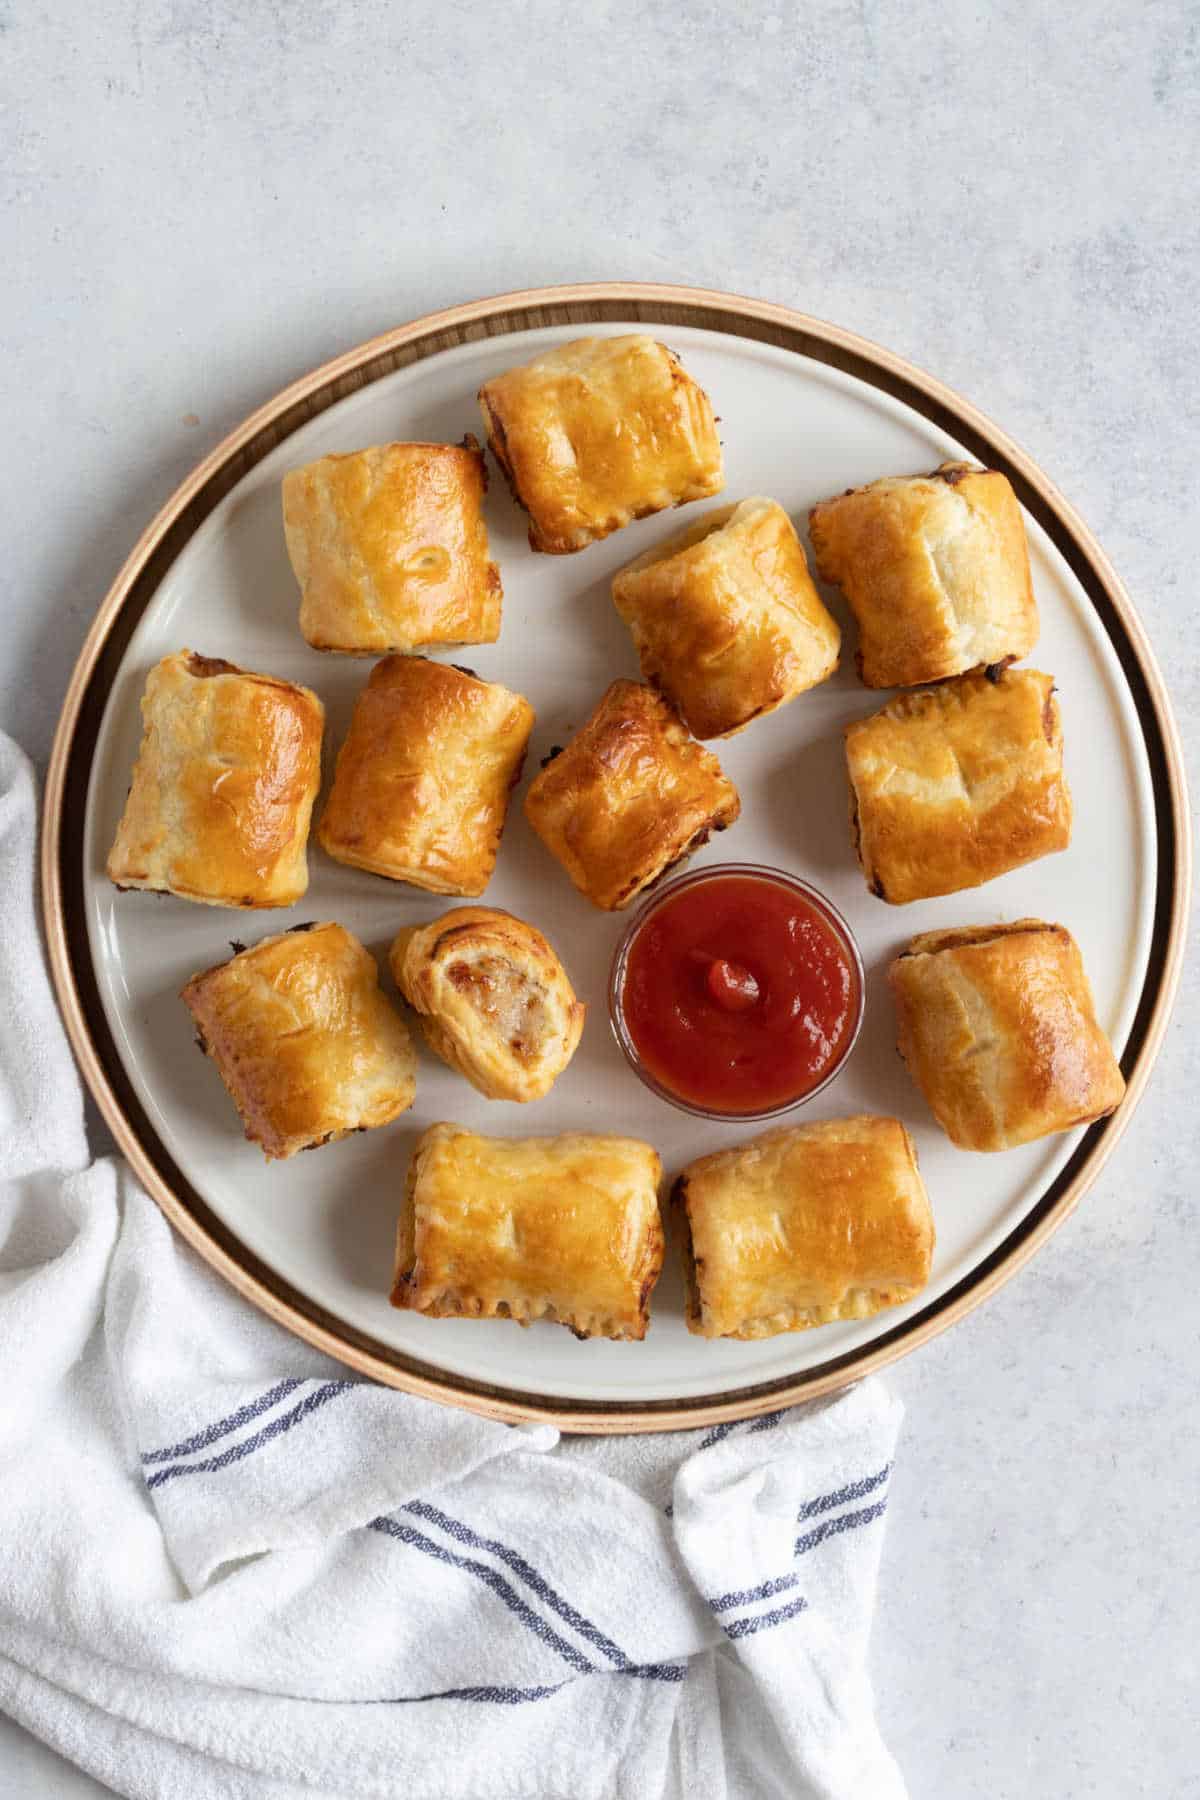 A plate of sausage rolls with a pot of ketchup.